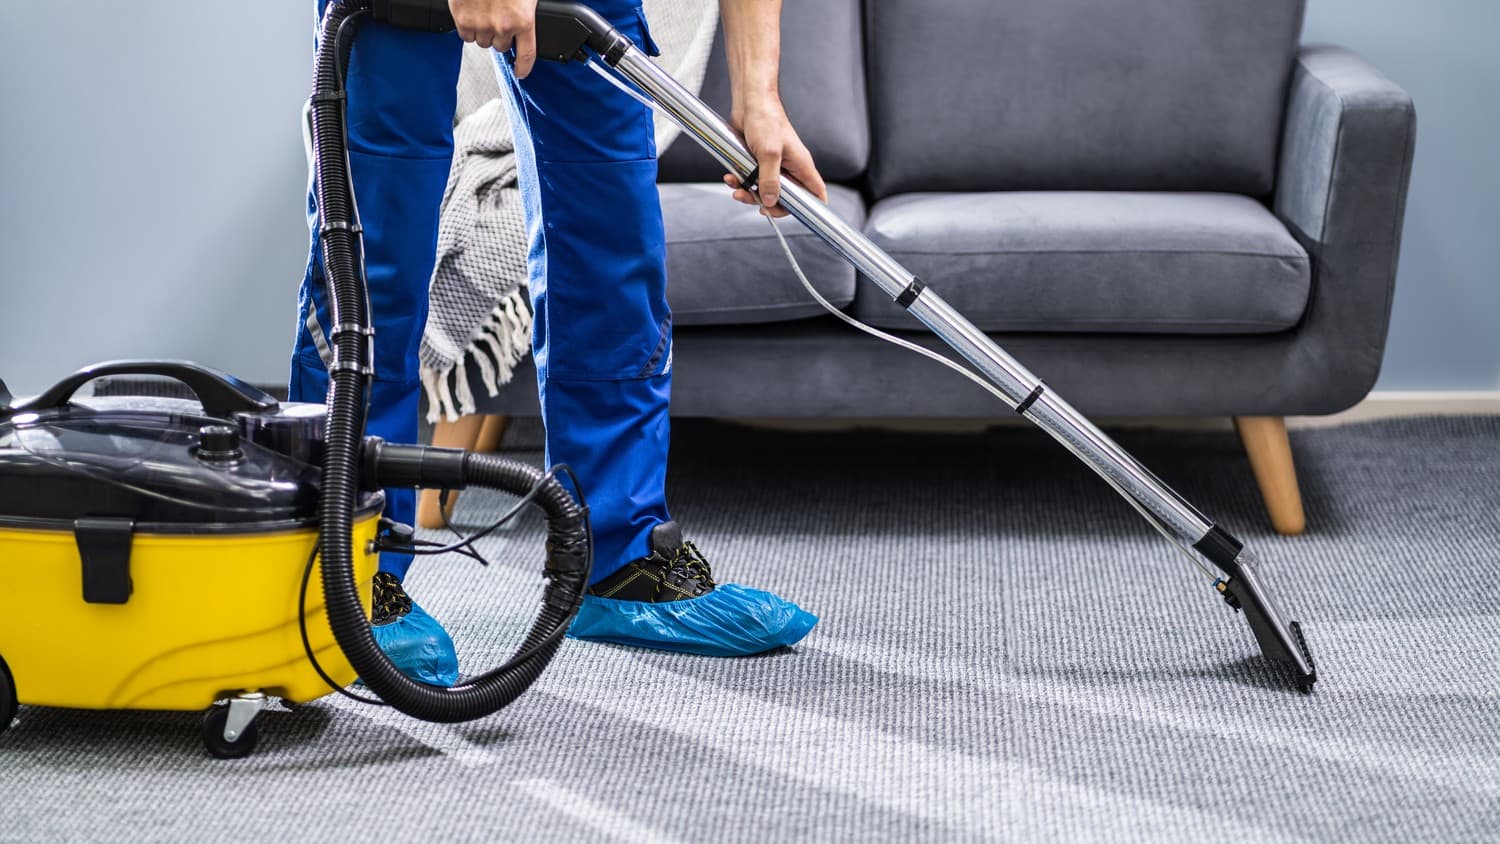 A person using a vacuum cleaner to clean a carpeted floor.